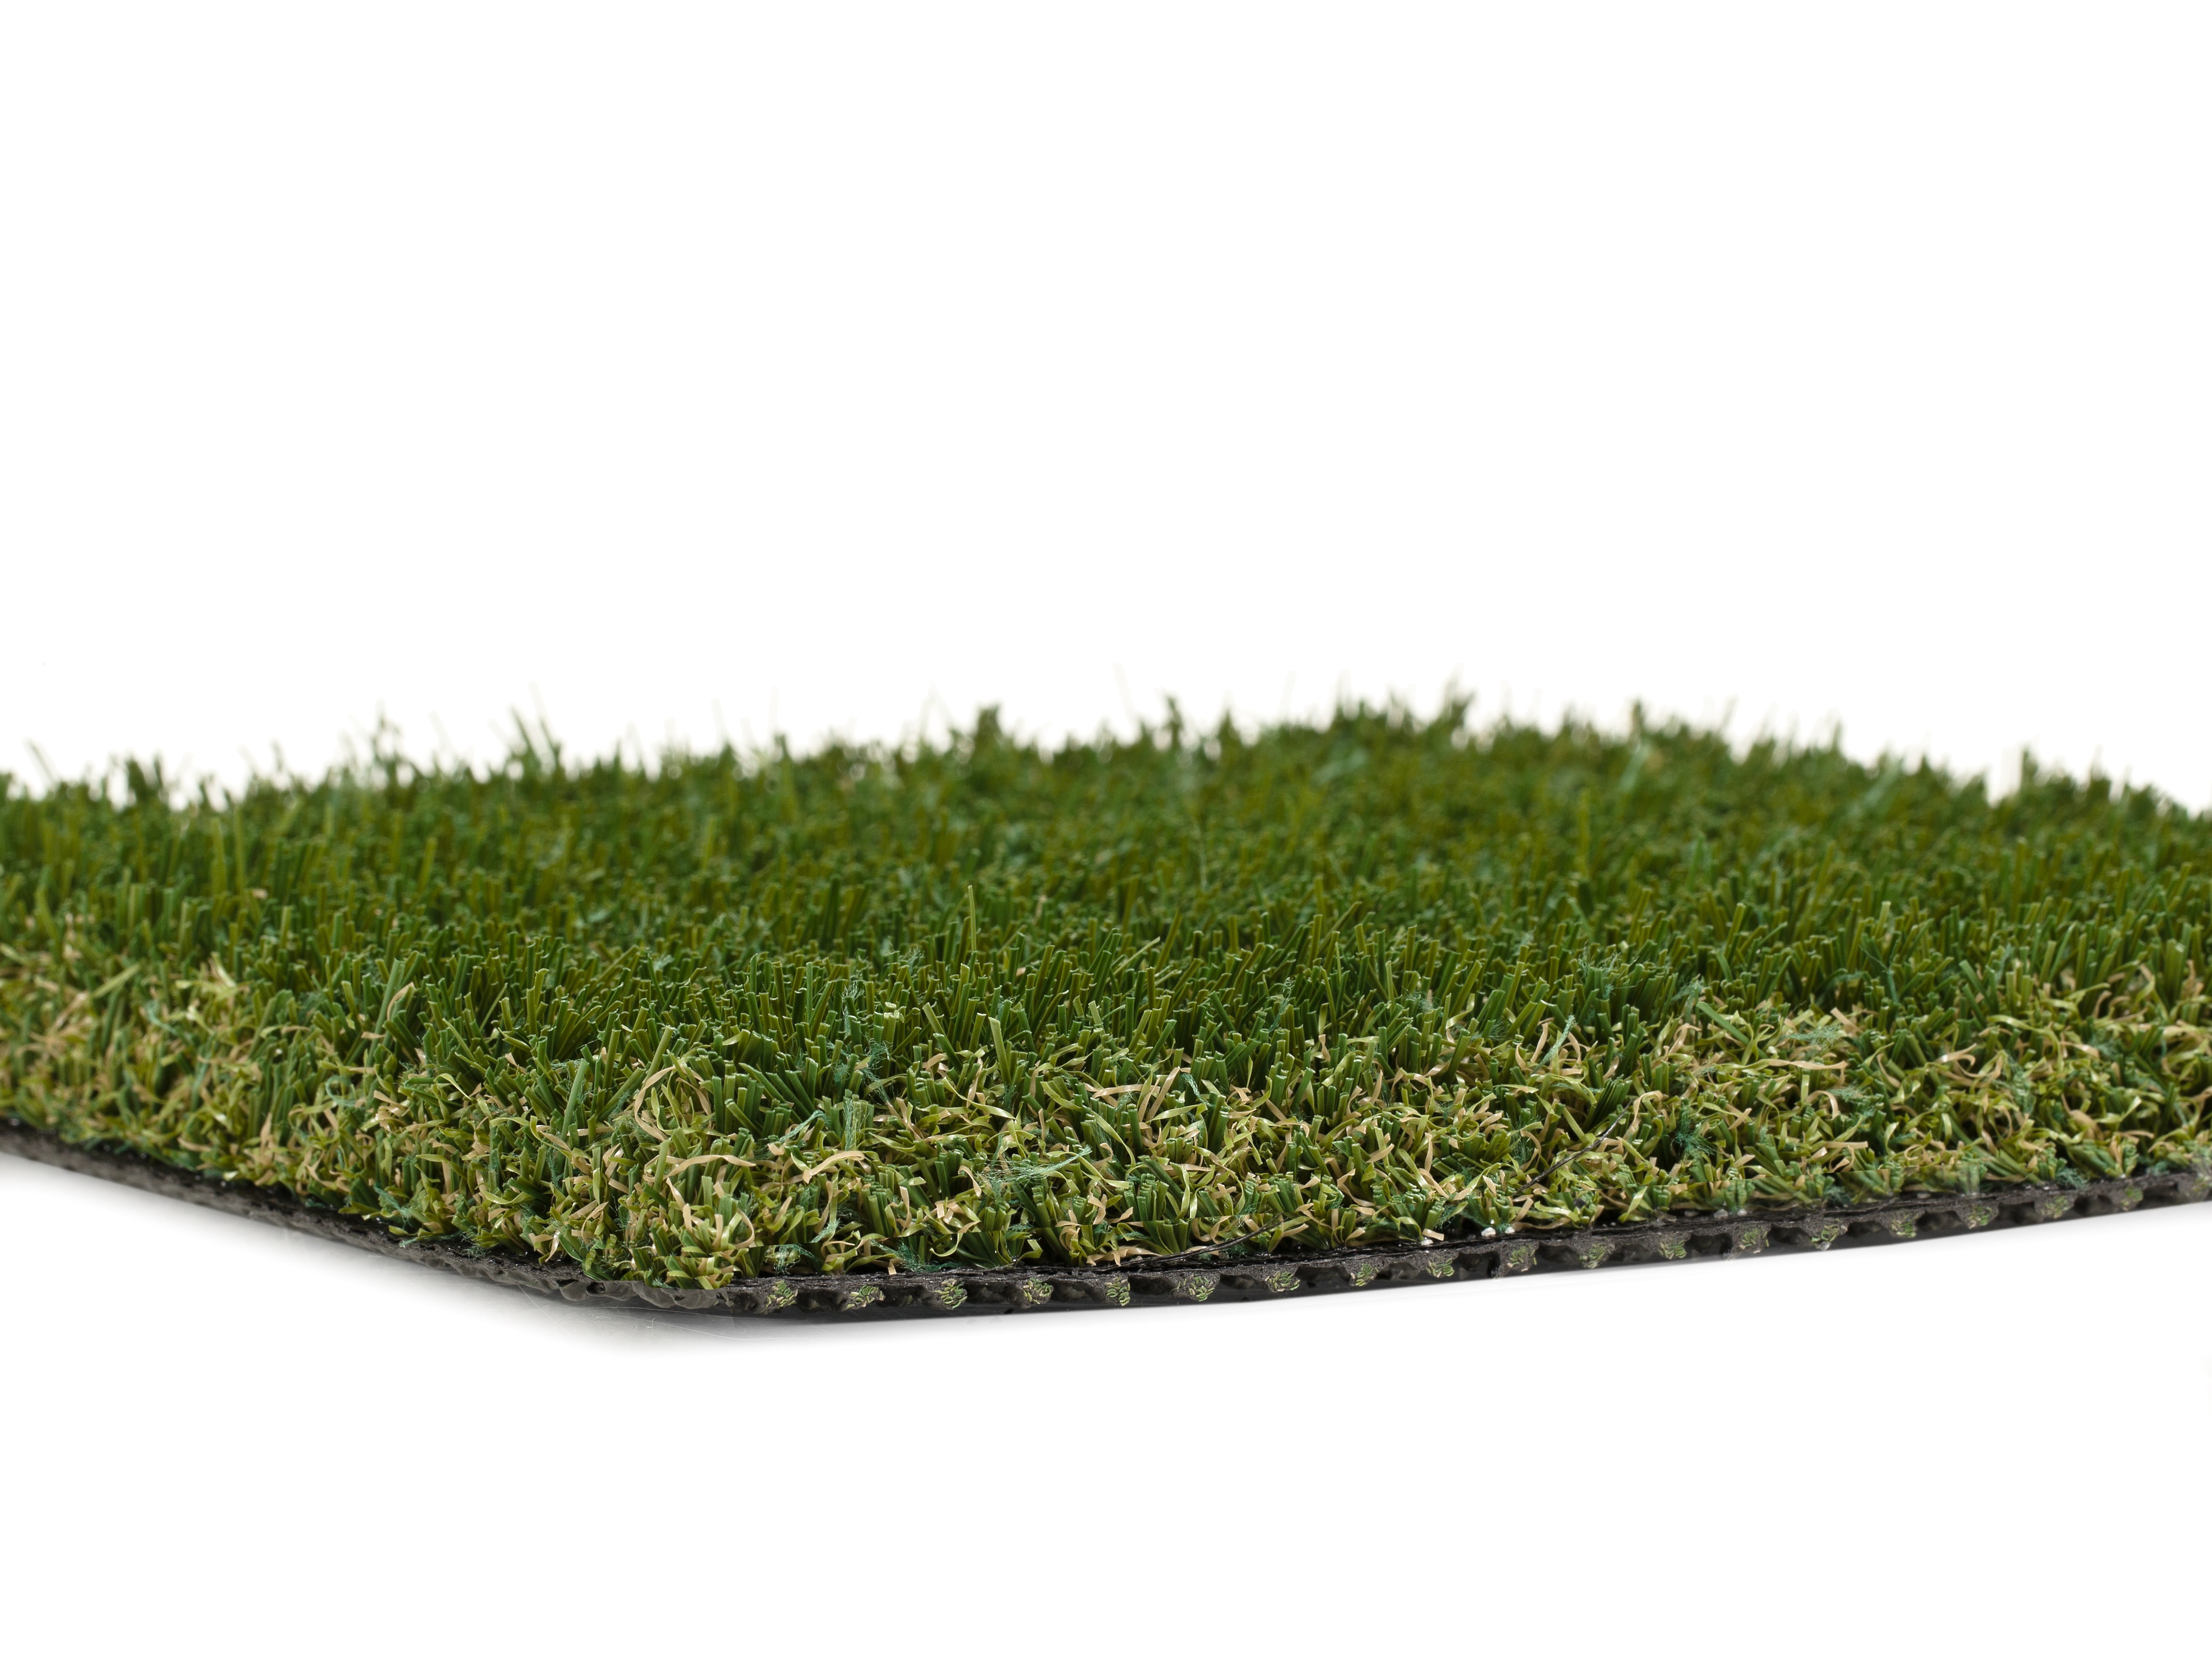 Soft Artificial Grass Mat/Rug for Family and Pets 1'x15' Pile Height 1 1/2"